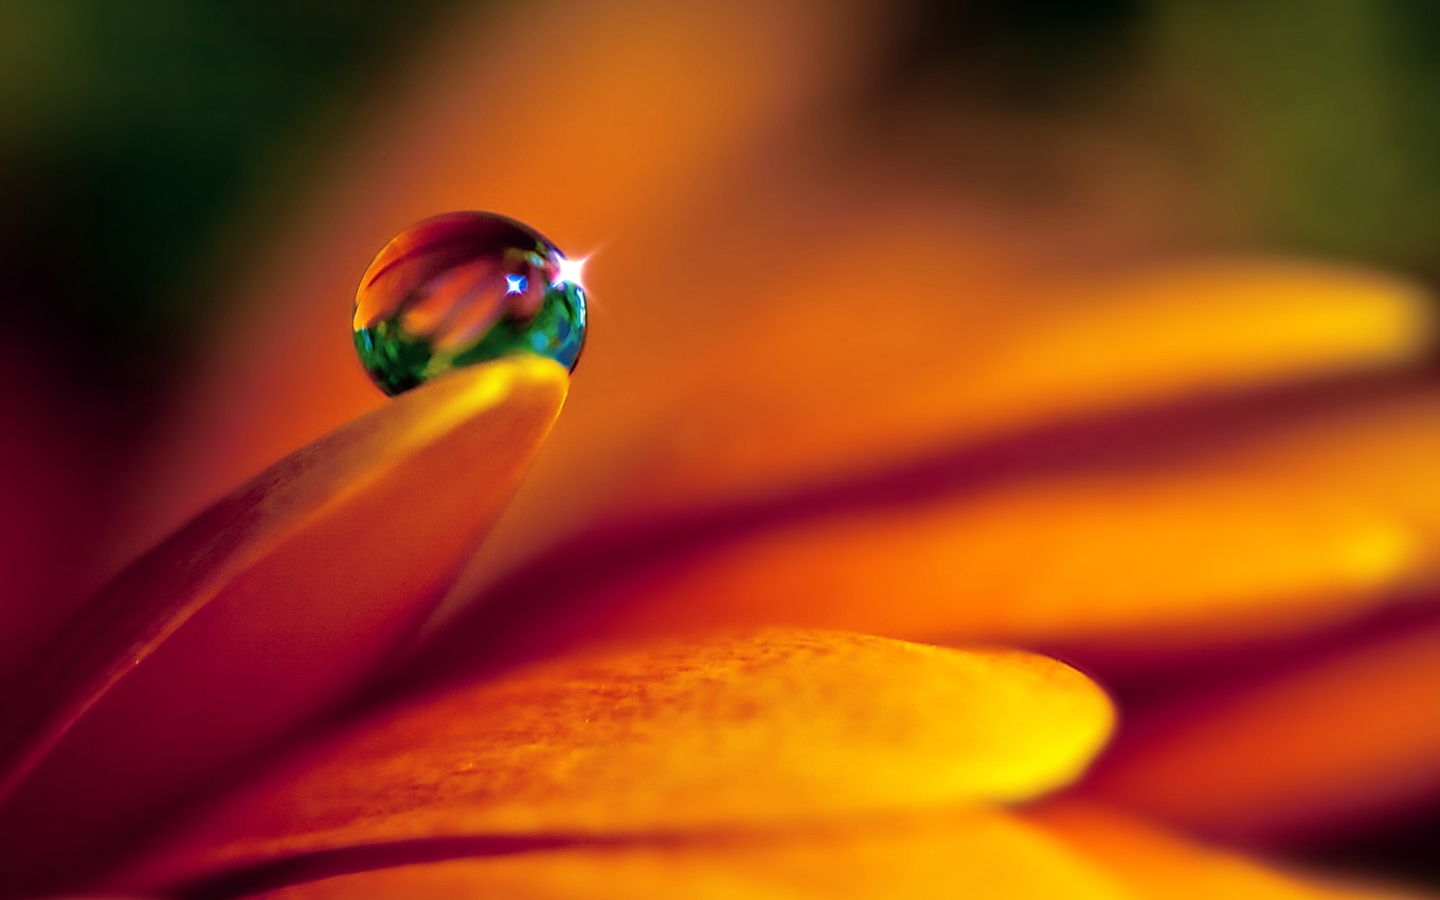 Mario Alesso Vila Photography - Flower In Water , HD Wallpaper & Backgrounds